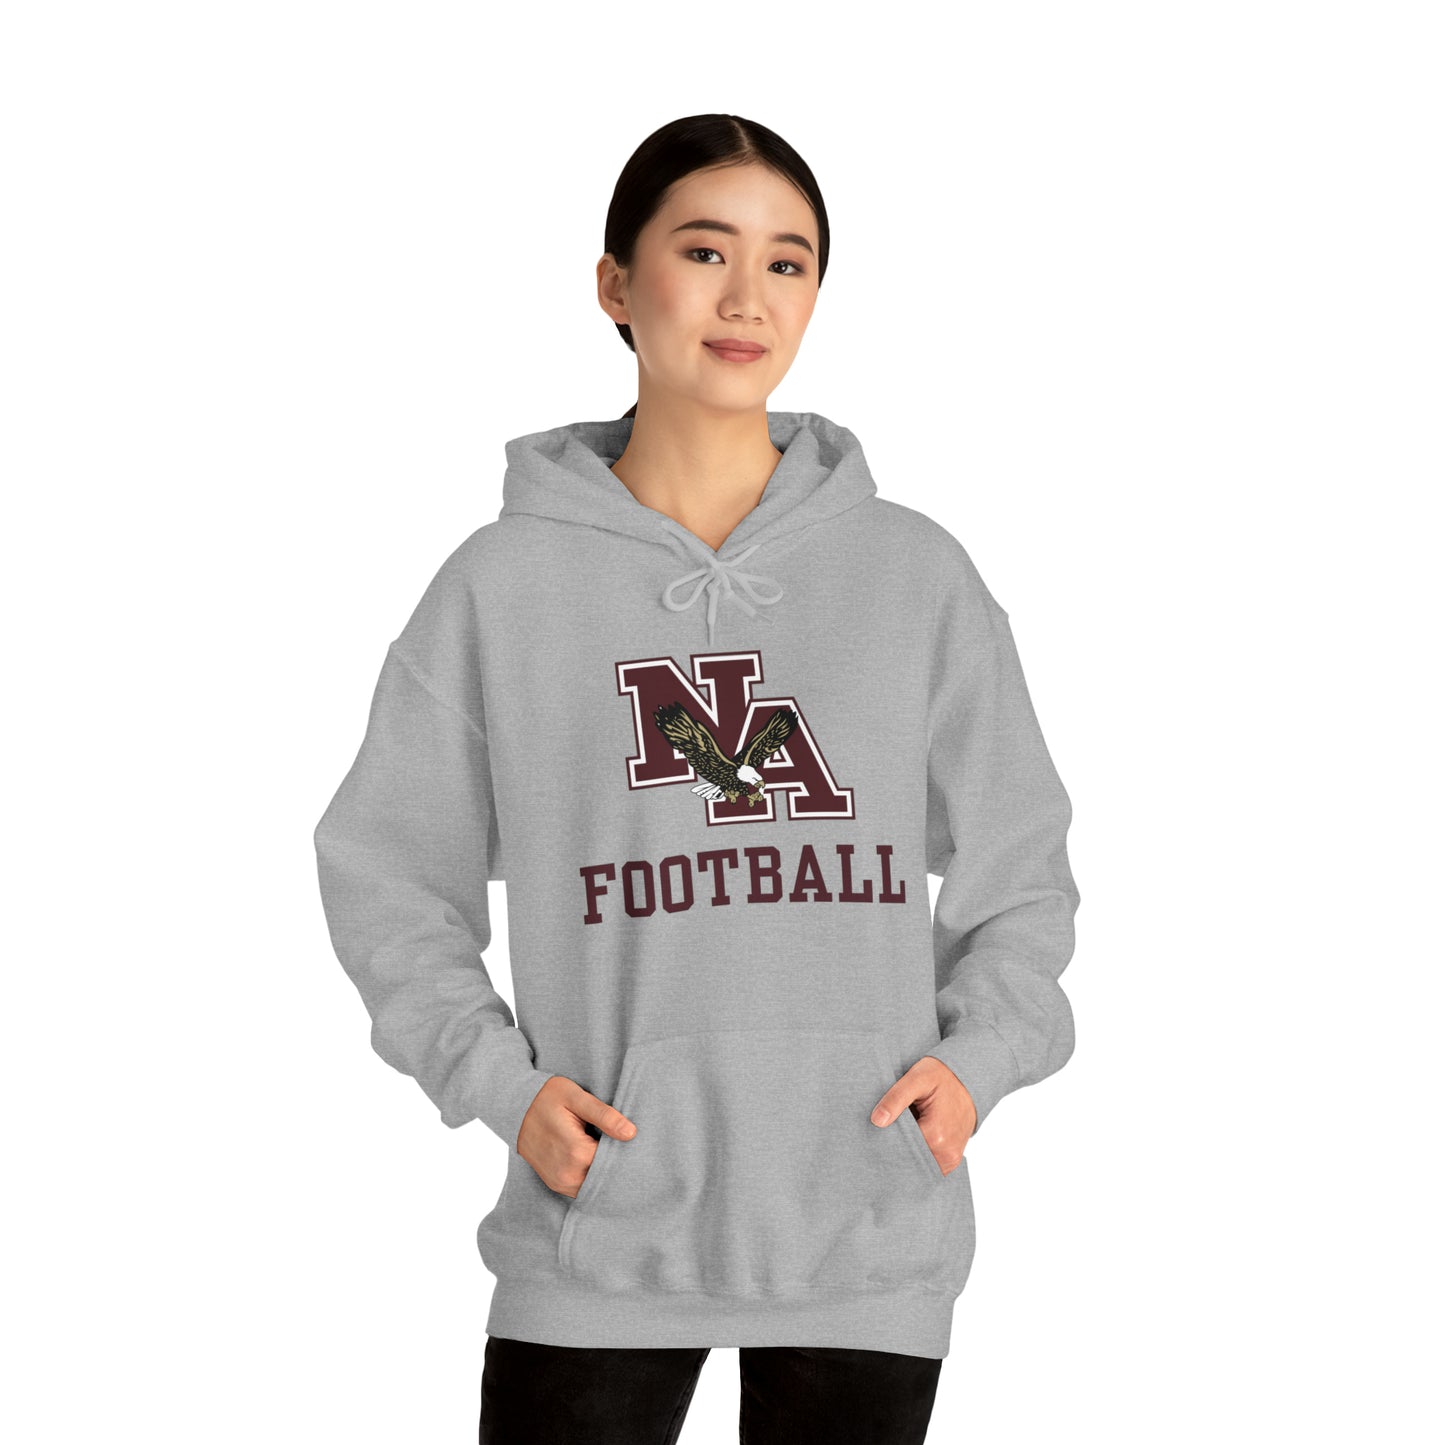 Adult Unisex Football Classic Logo Graphic Hoodie - New Albany Eagles